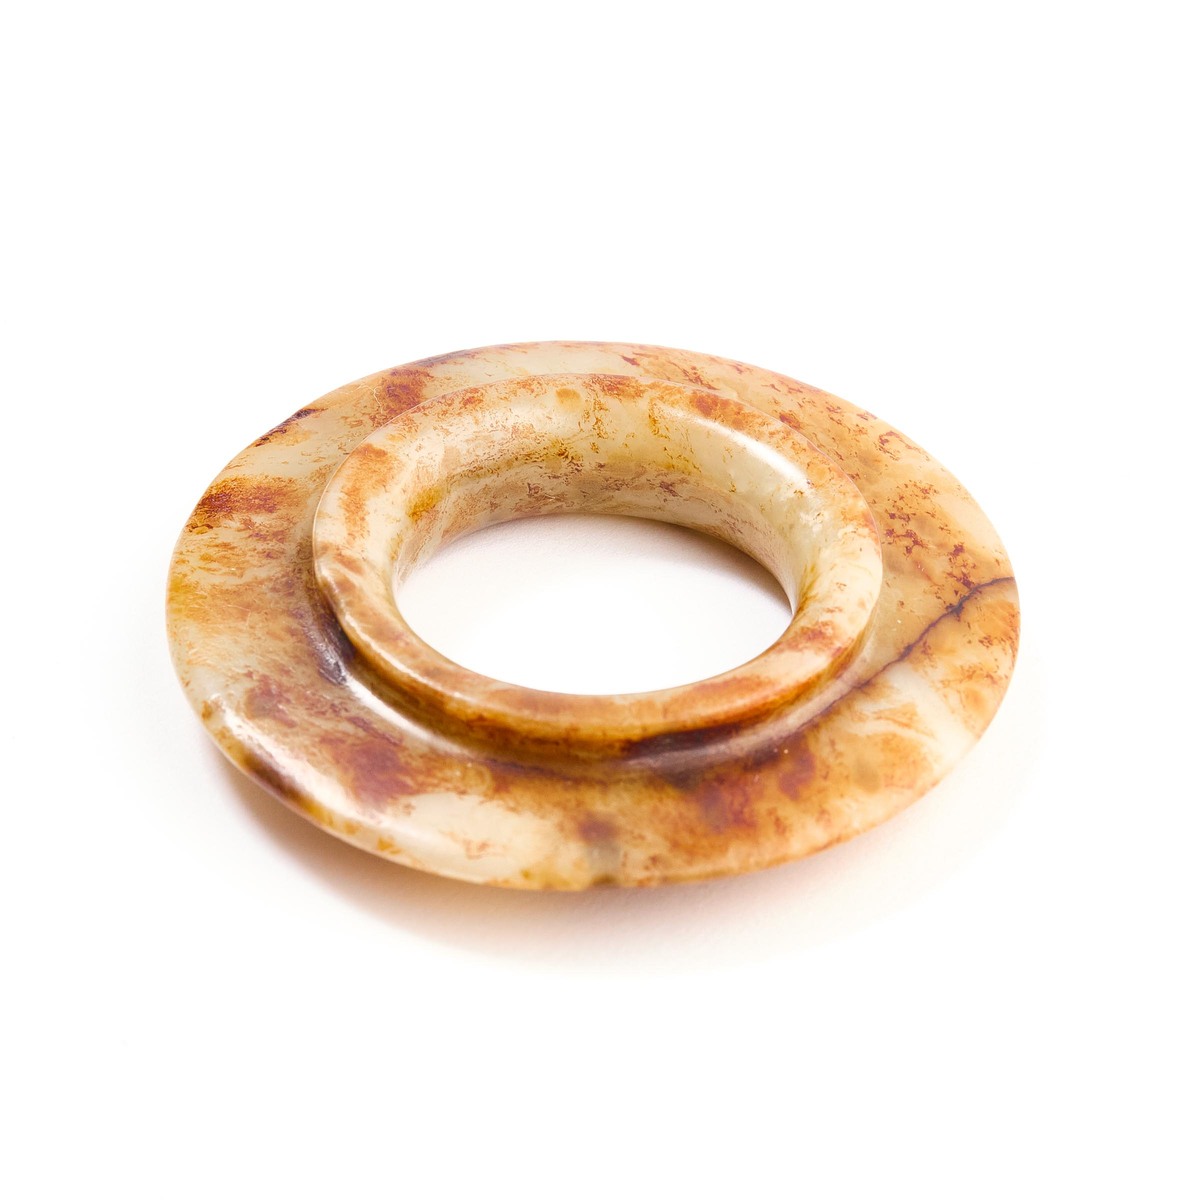 A White and Russet Jade Ring-Shaped Ornament, Song-Ming Dynasty (960-1644), 宋/明 白玉带皮凸唇环, diameter 2. - Image 3 of 7